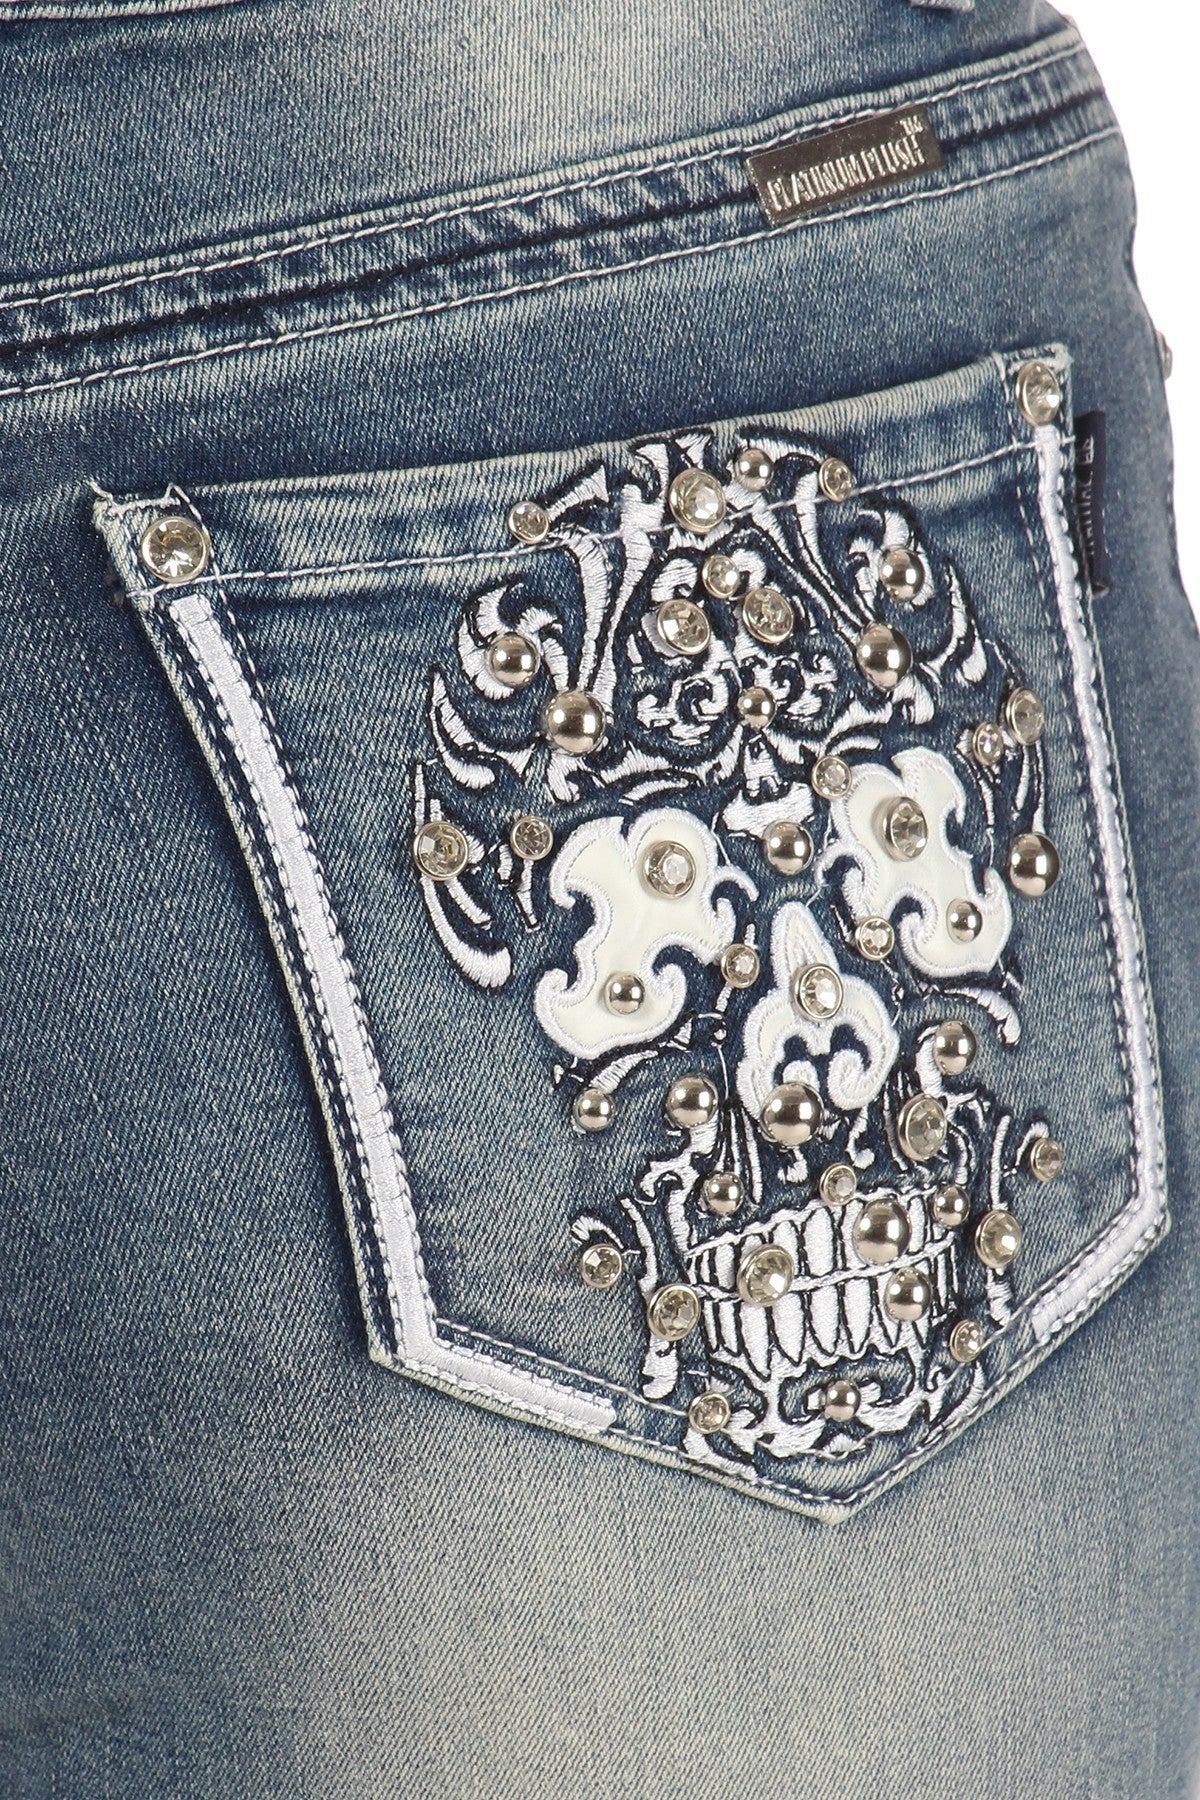 Gorgeously designed skull candy embroidery with leather and border detailing embellished in rhinestones on a 5 pocket, boot-cut